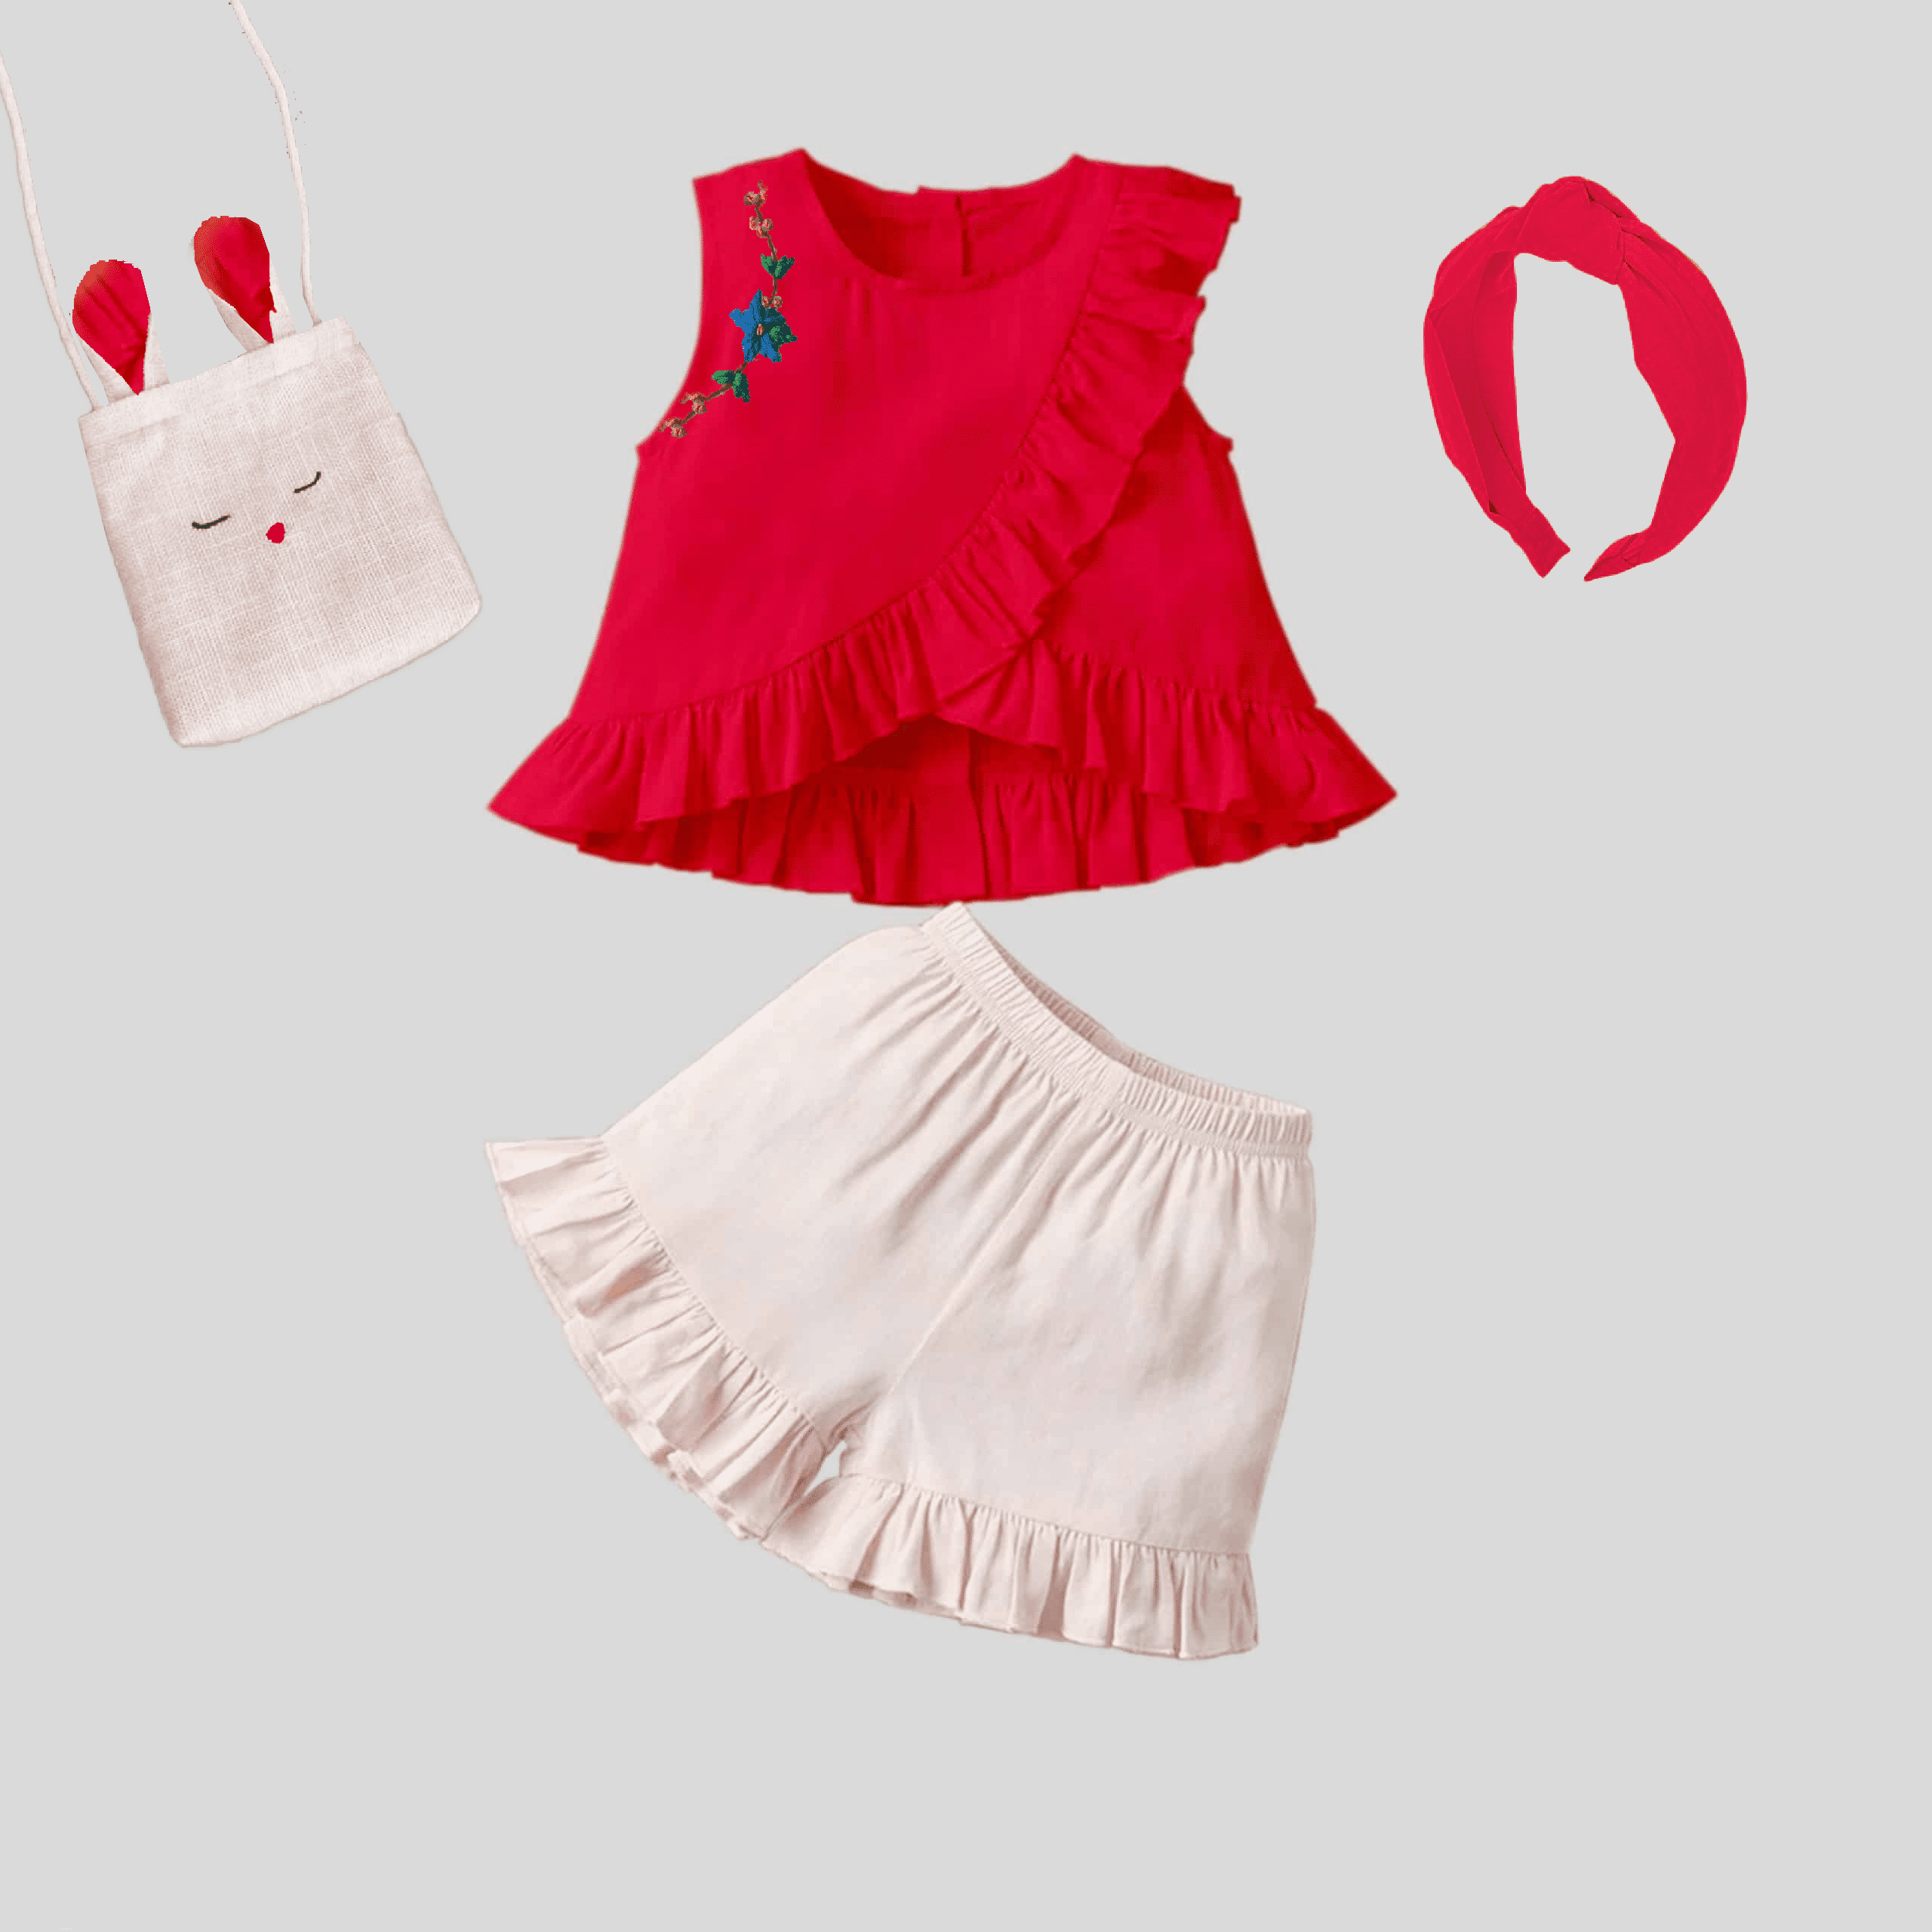 Girls sleeveless red top with cute frill detail and shorts set and free hairband or bag-RKFCW234